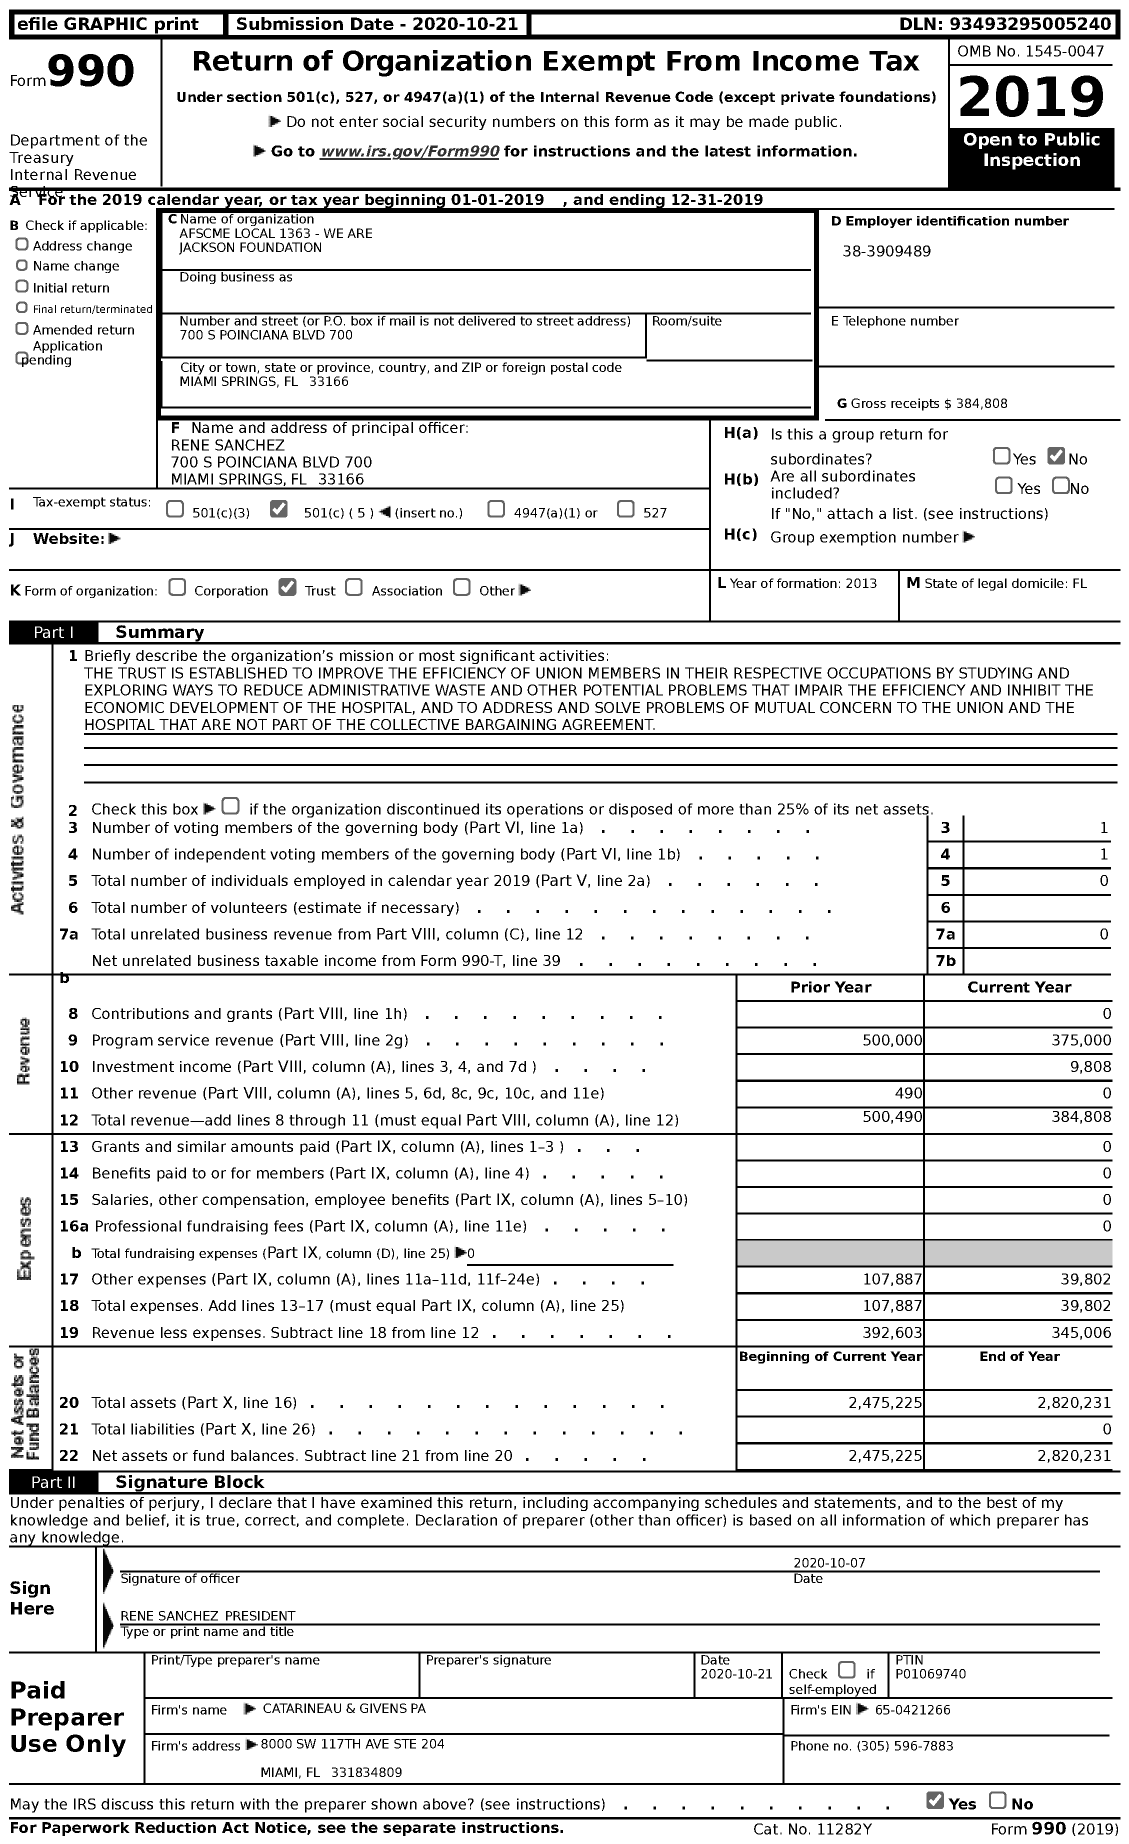 Image of first page of 2019 Form 990 for AFSCME Local 1363 - We Are Jackson Foundation